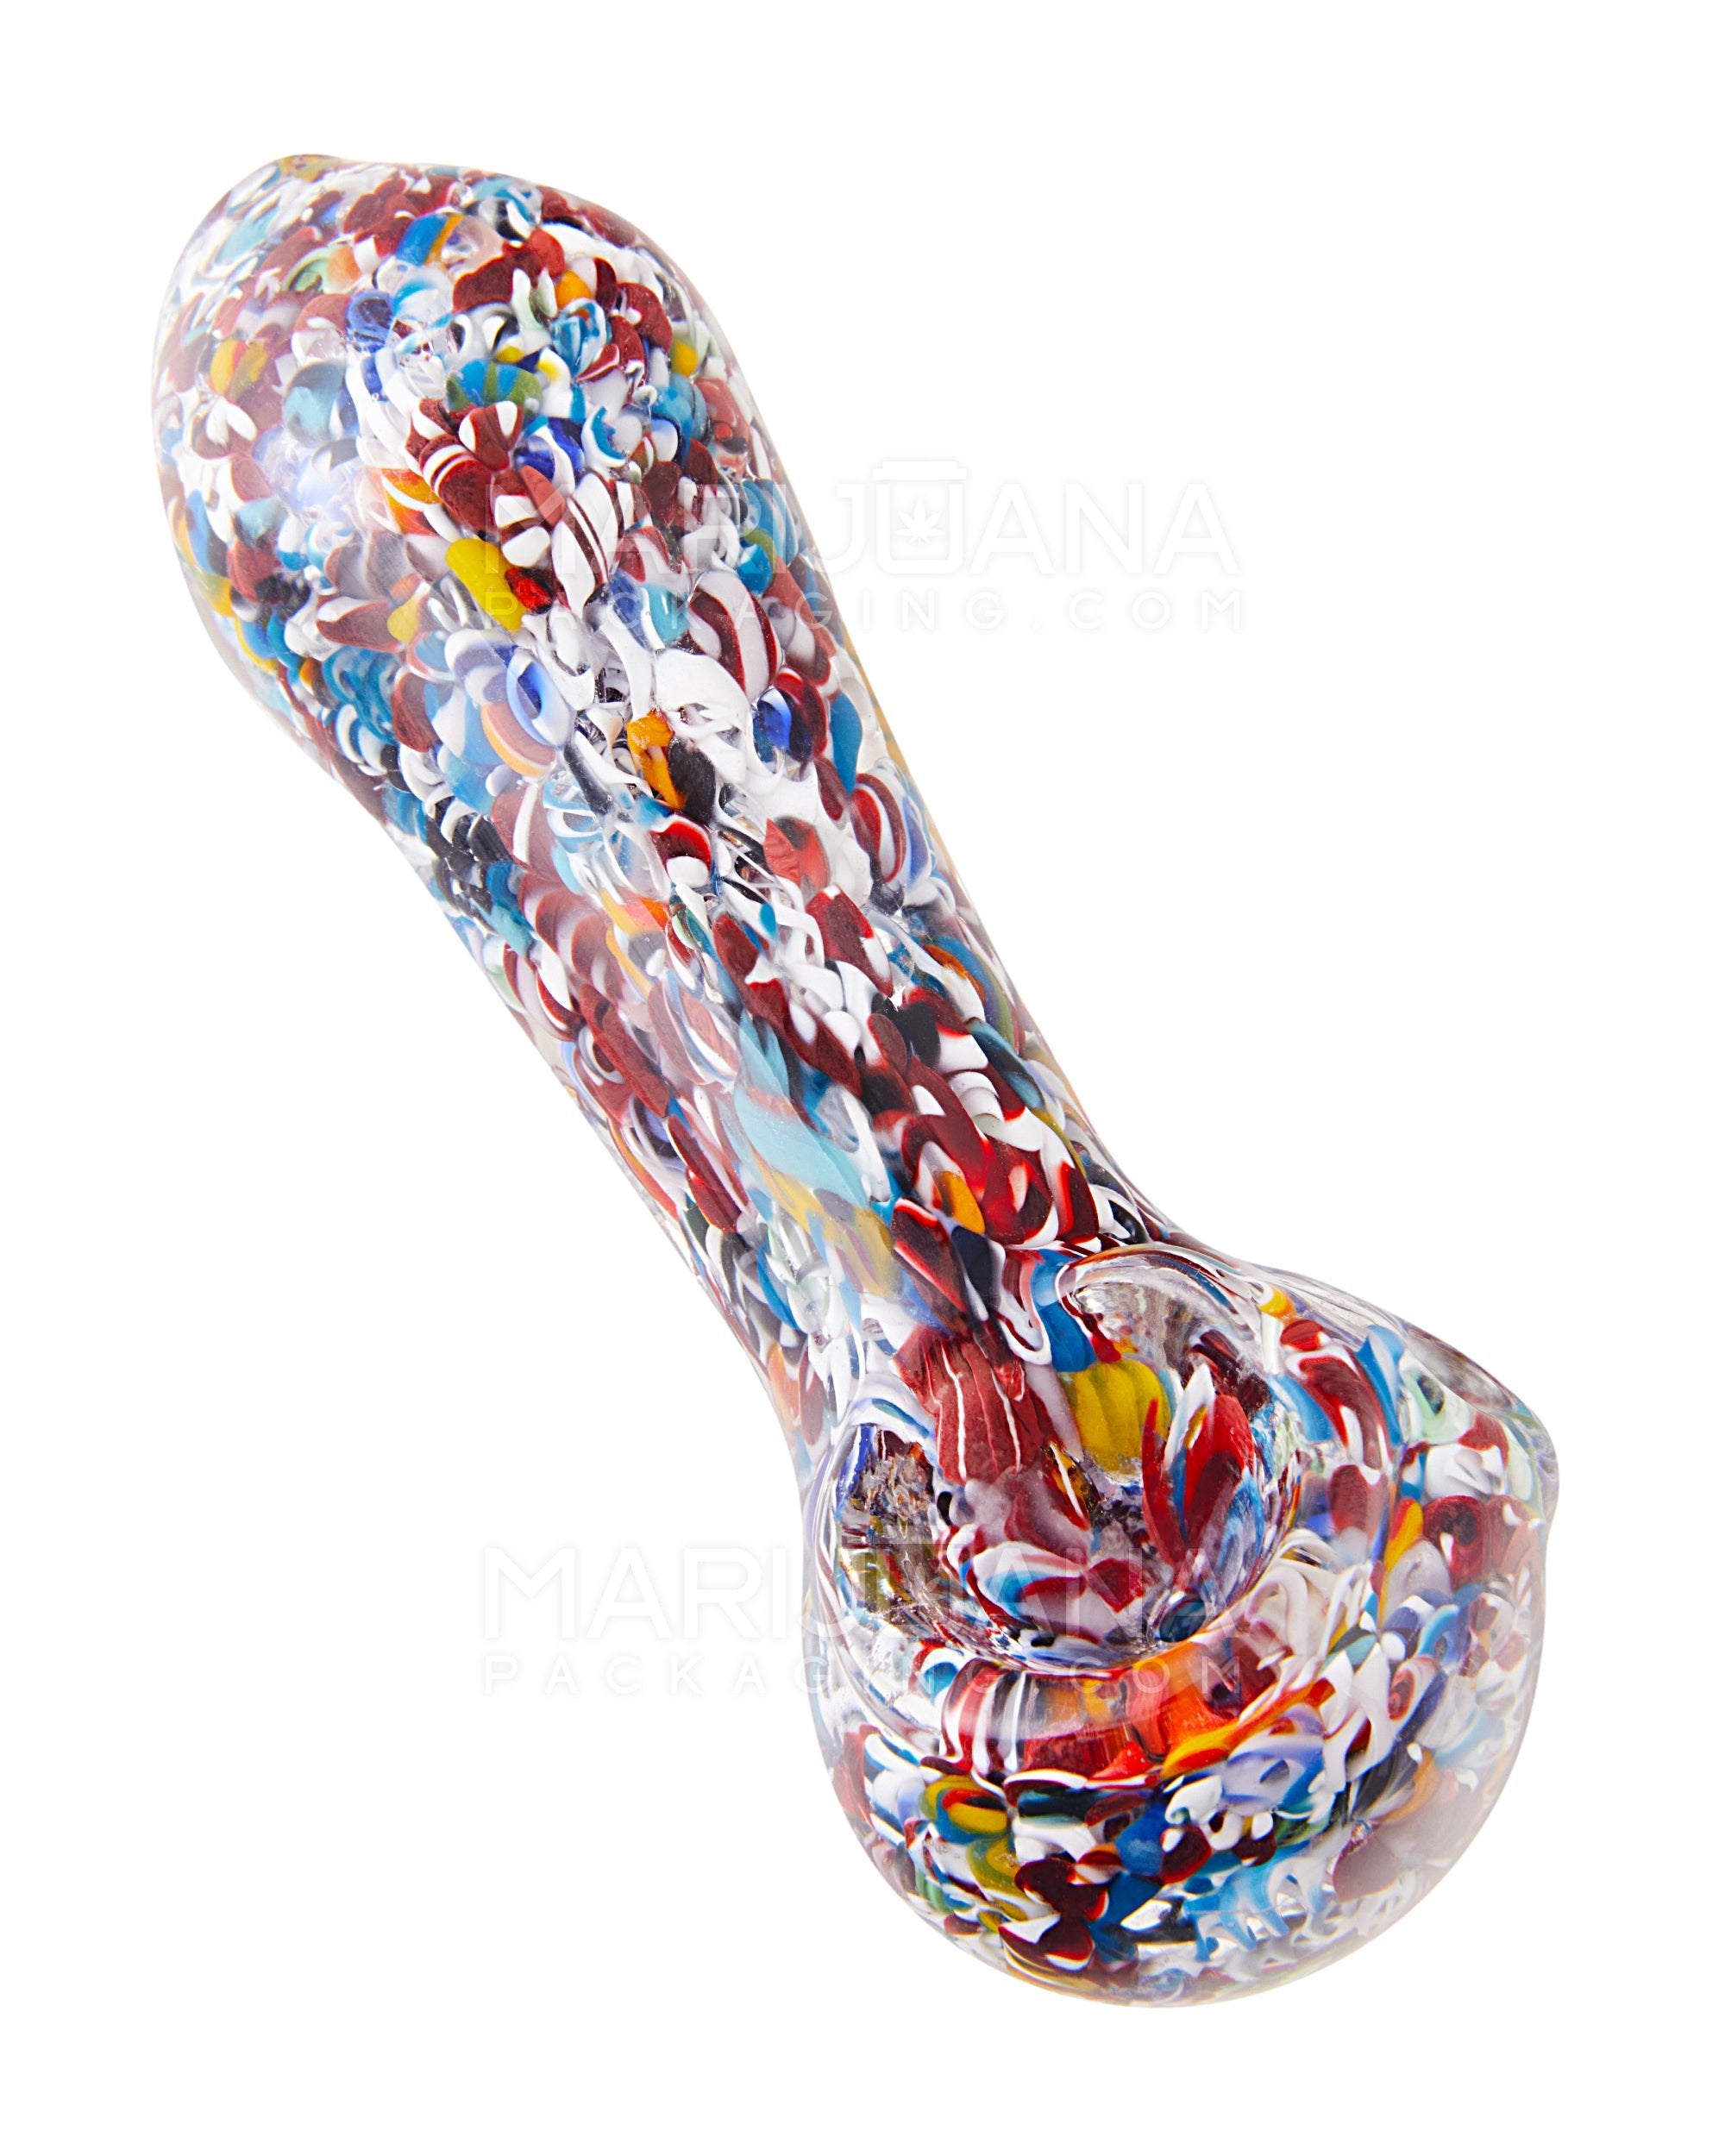 Frit & Dichro Rainbow Spoon Hand Pipe | 4in Long - Glass - Assorted - 6